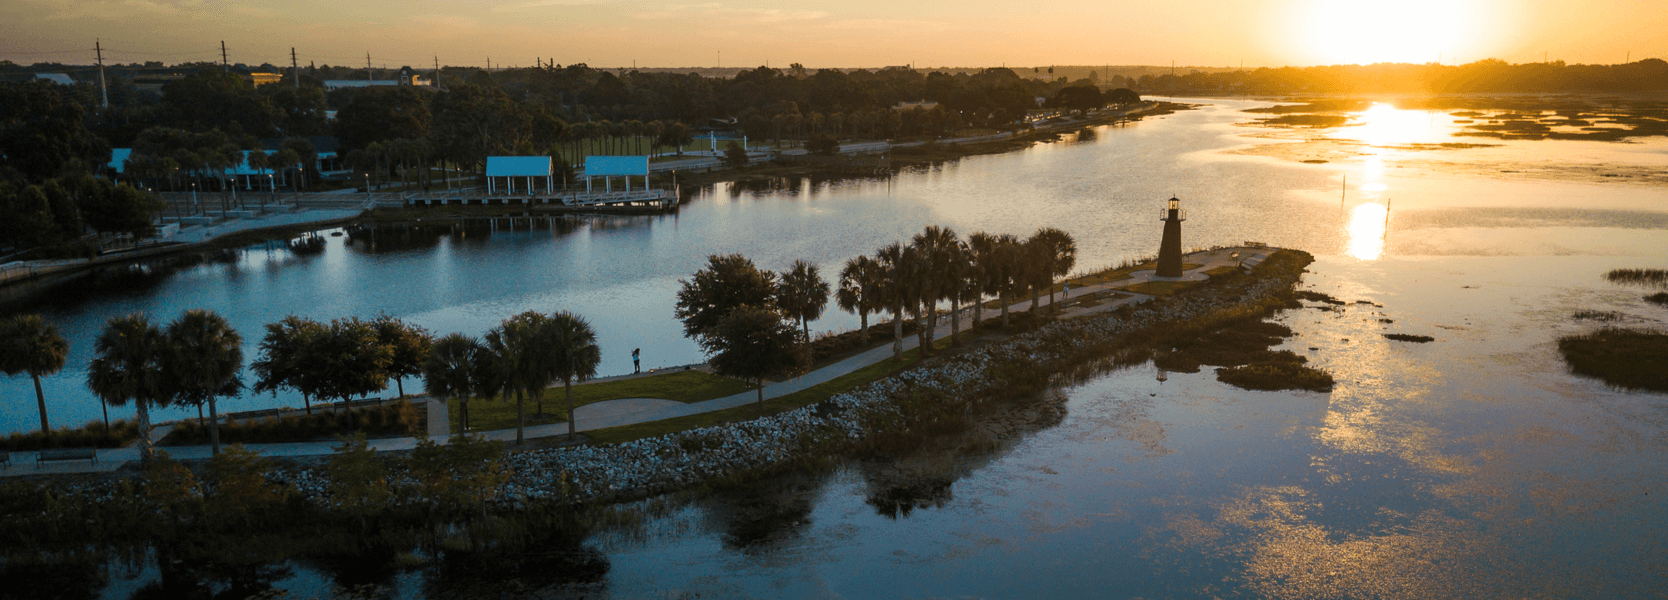 Discover Kissimmee Florida, located along the shores of the Shingle River